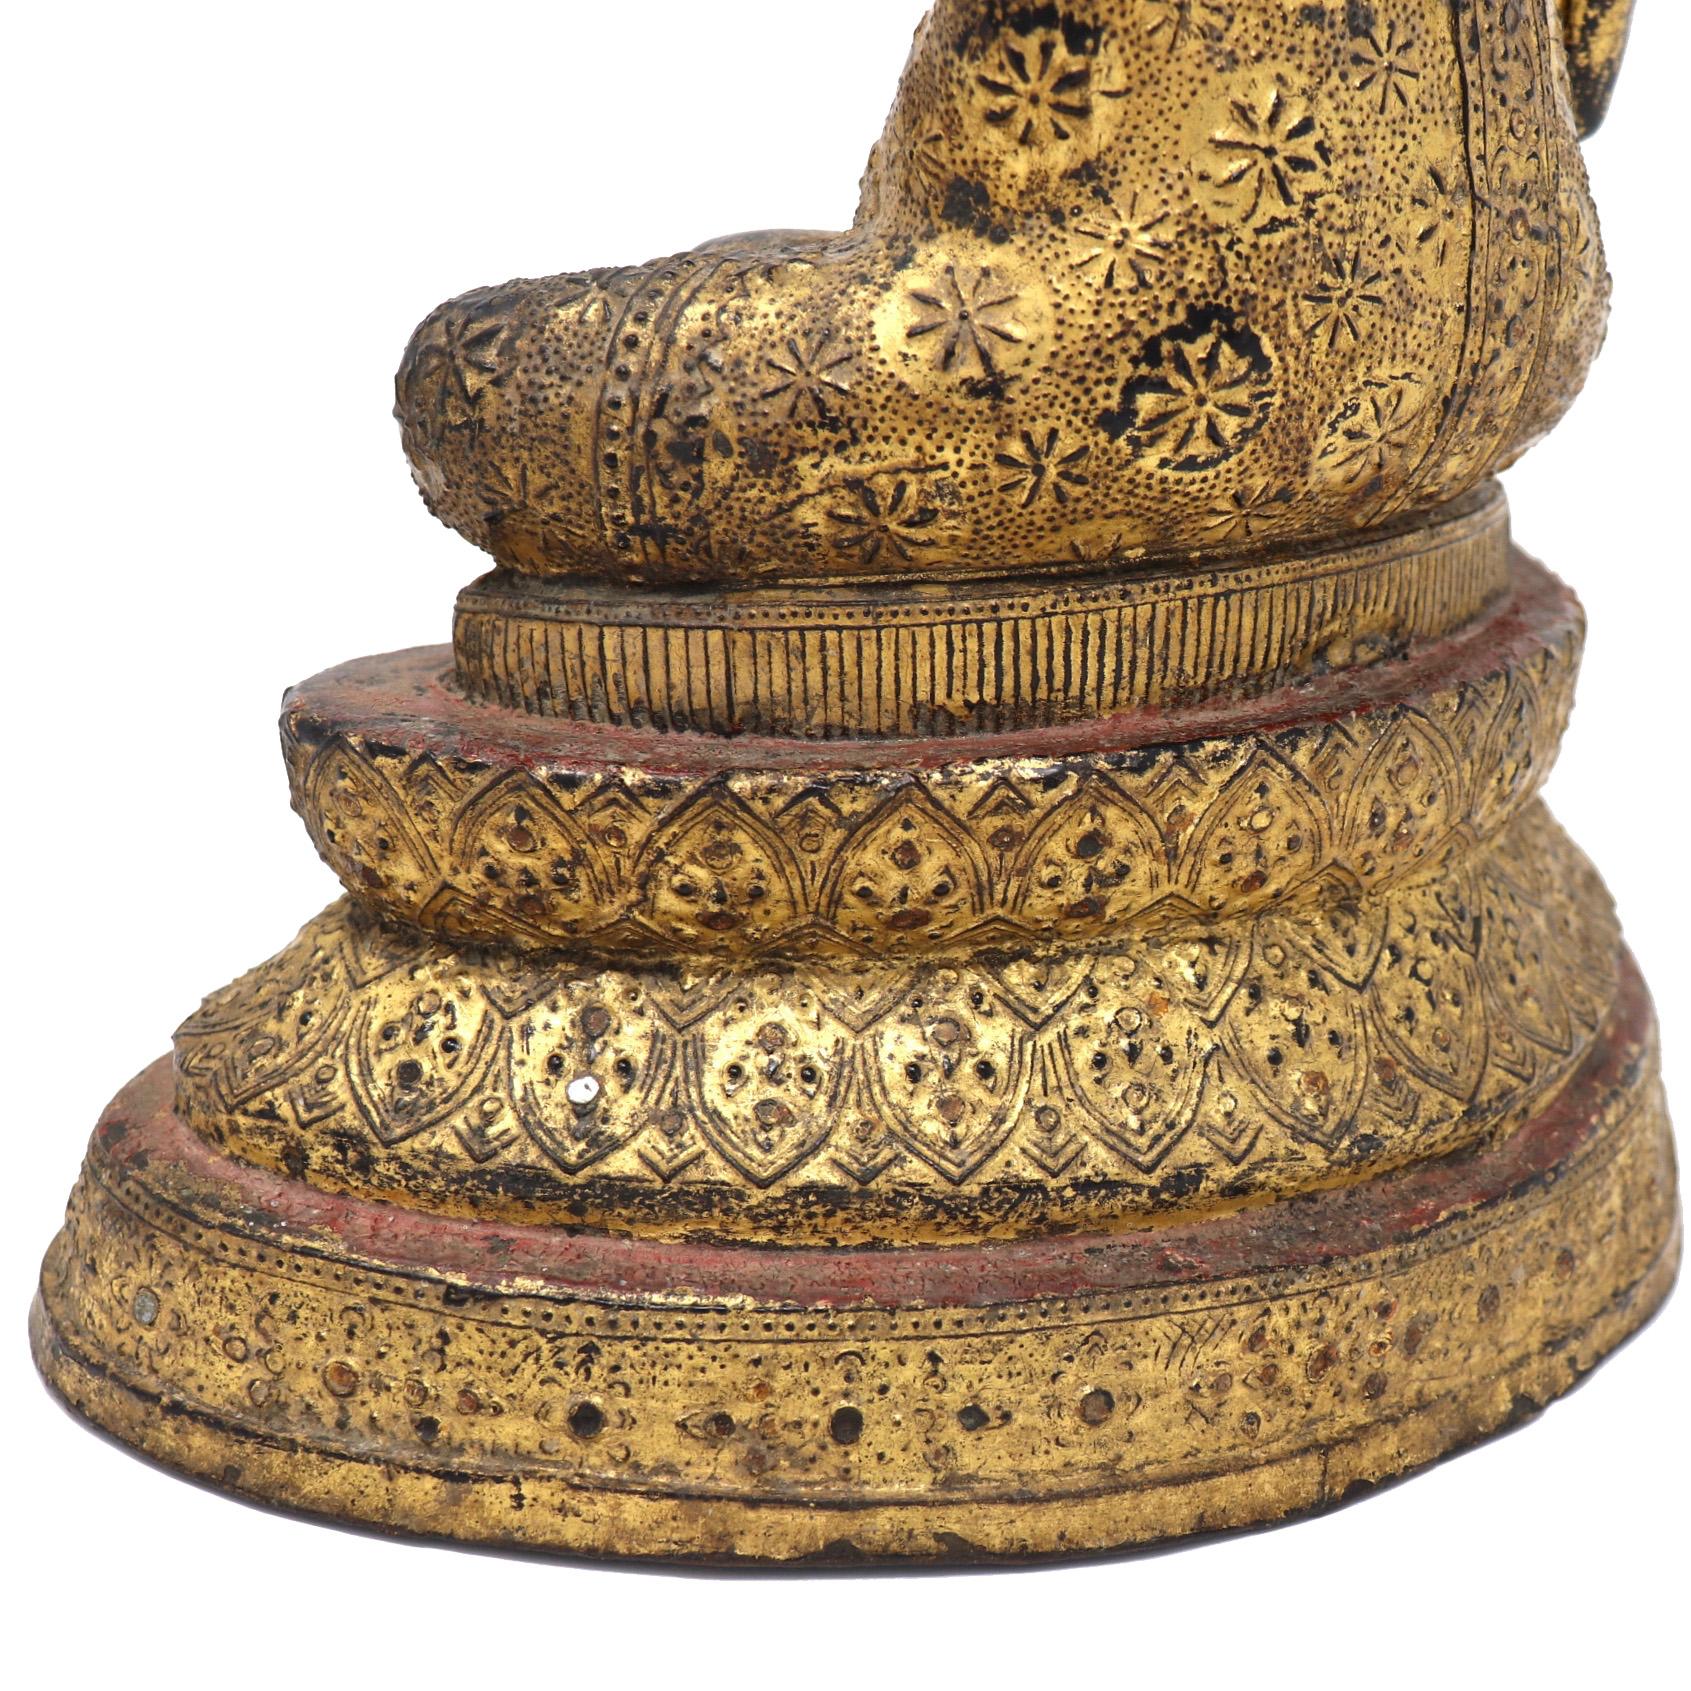 Thai Gilt Bronze Seated Earth Touching Buddha Figure, Late 19th Century For Sale 11